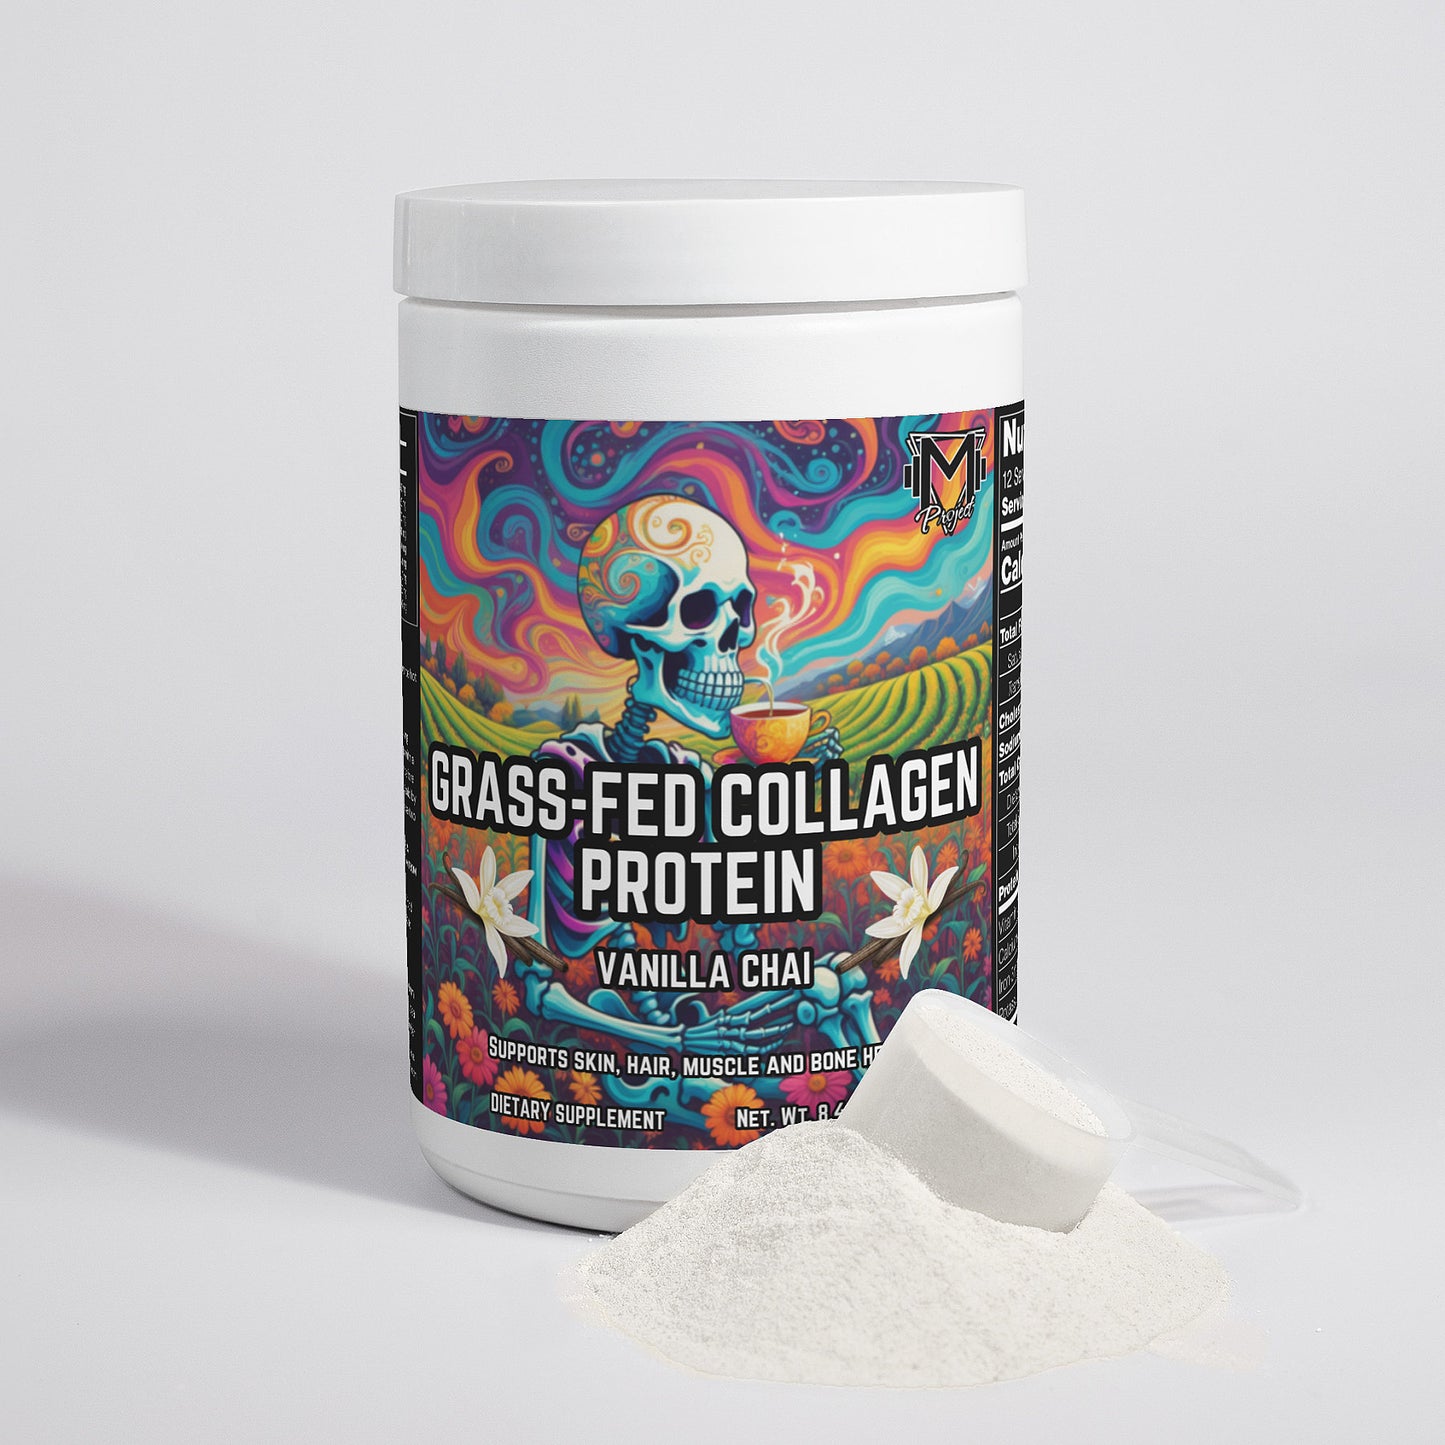 Grass-Fed Vanilla Chai Collagen Protein by Project M